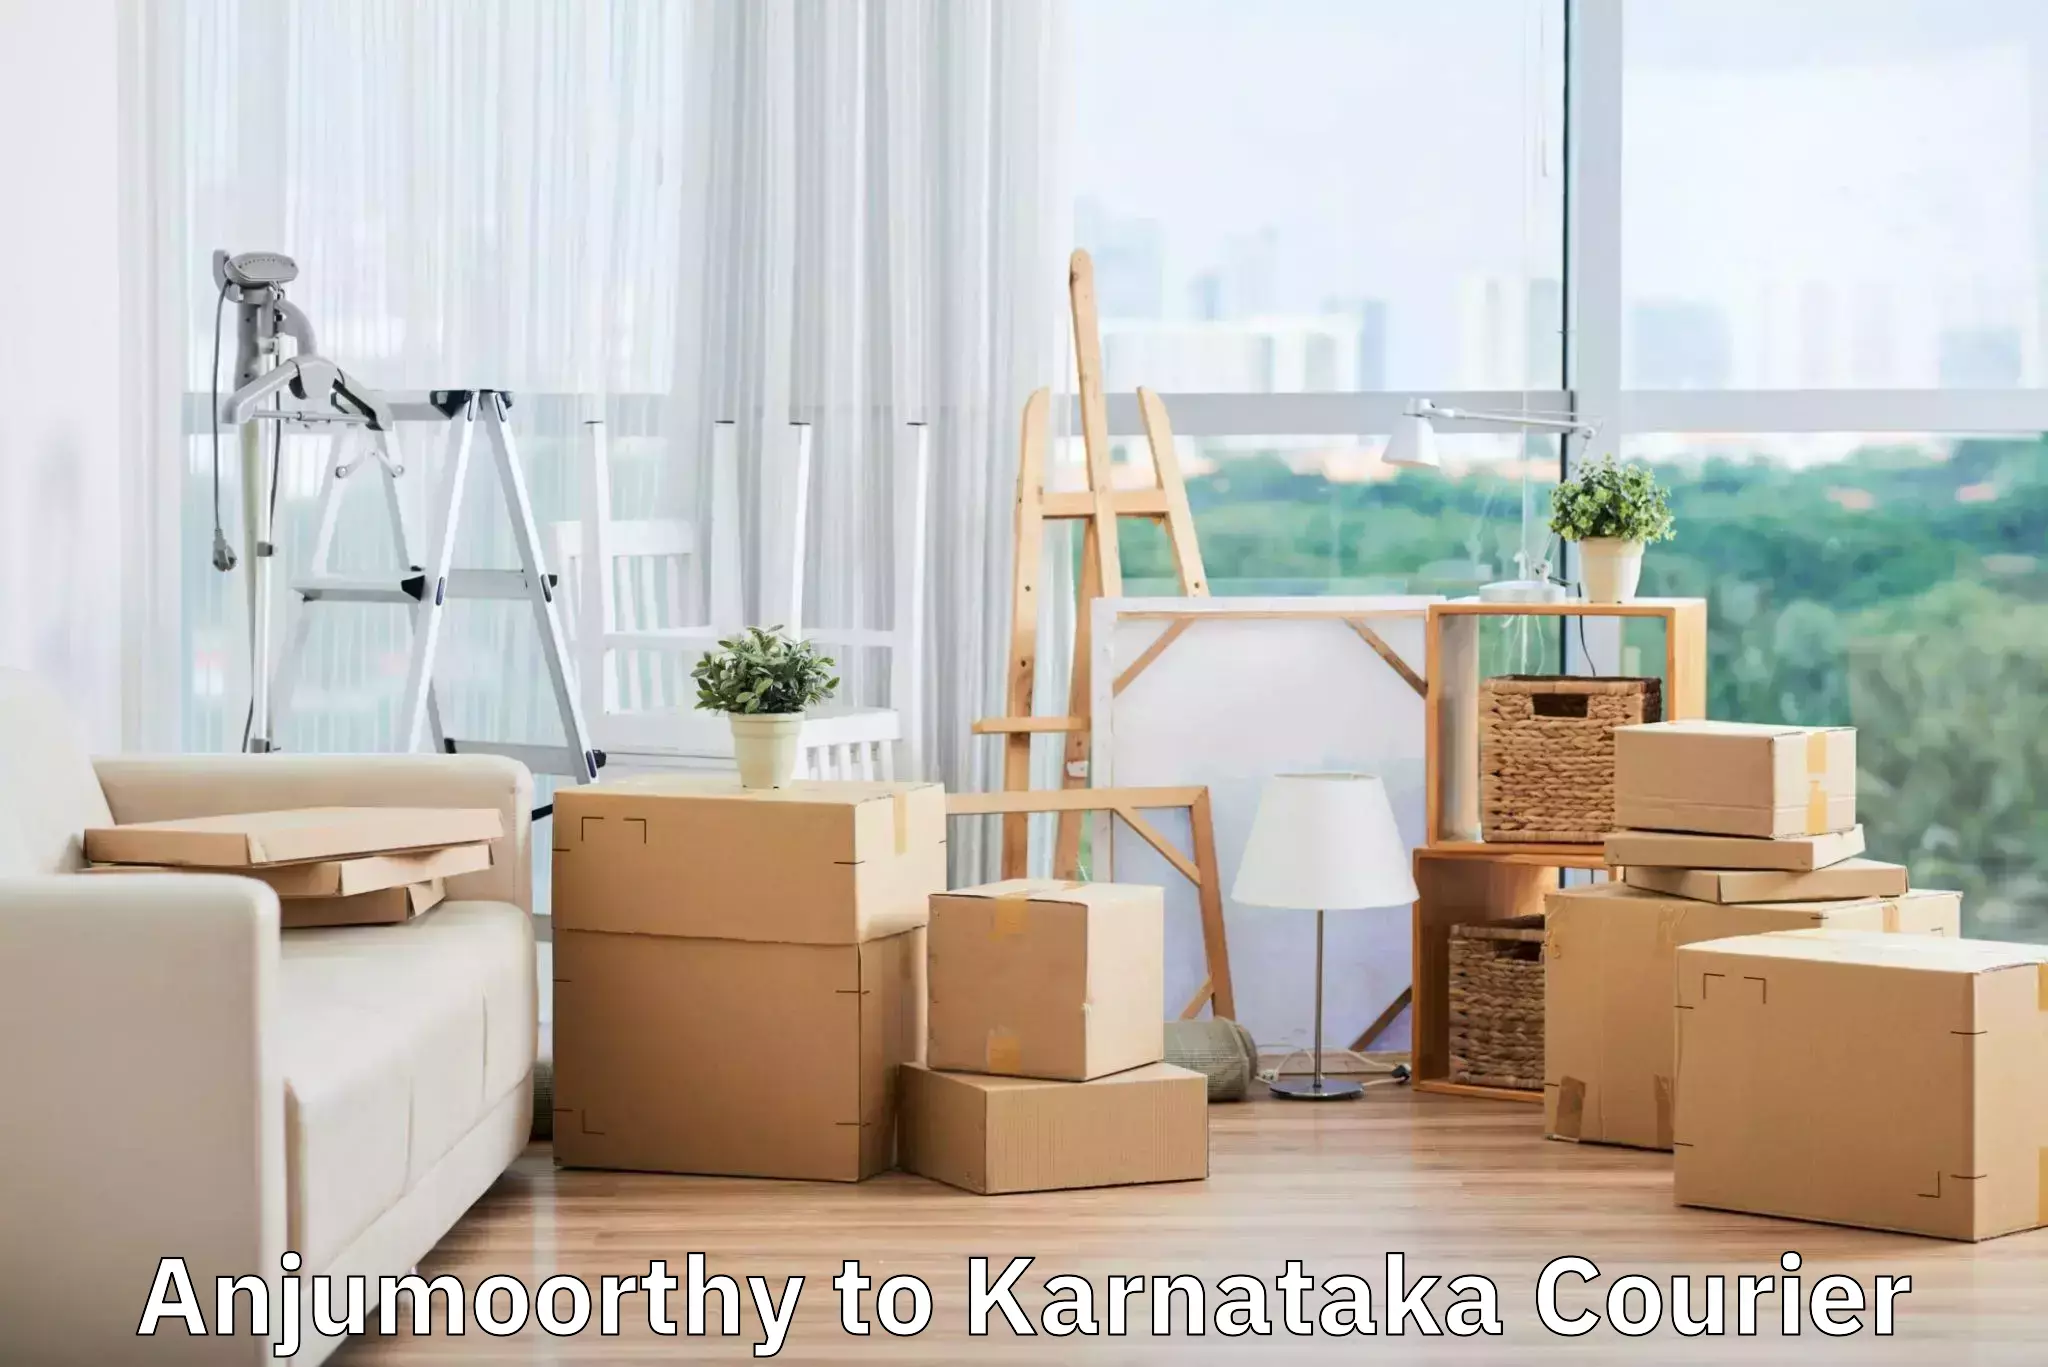 Scheduled baggage courier Anjumoorthy to Mangalore